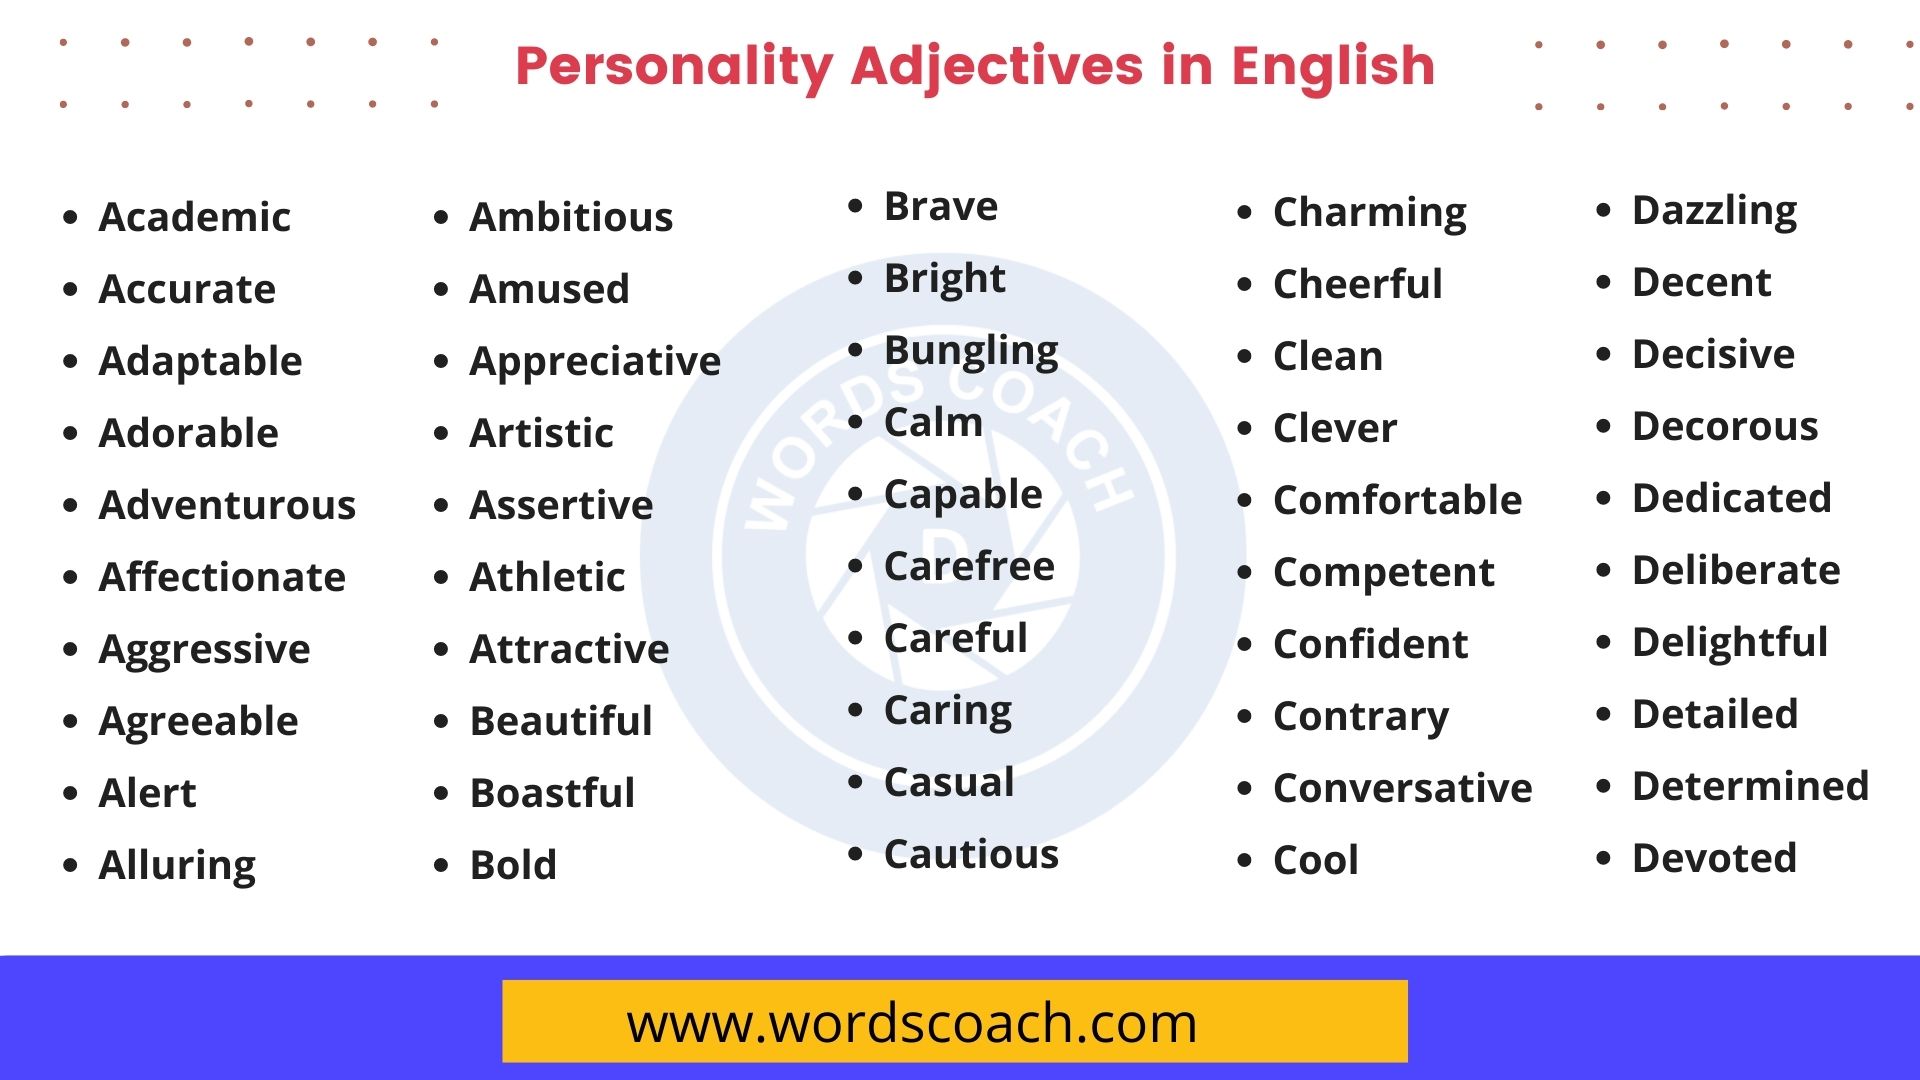 Personality Adjectives in English